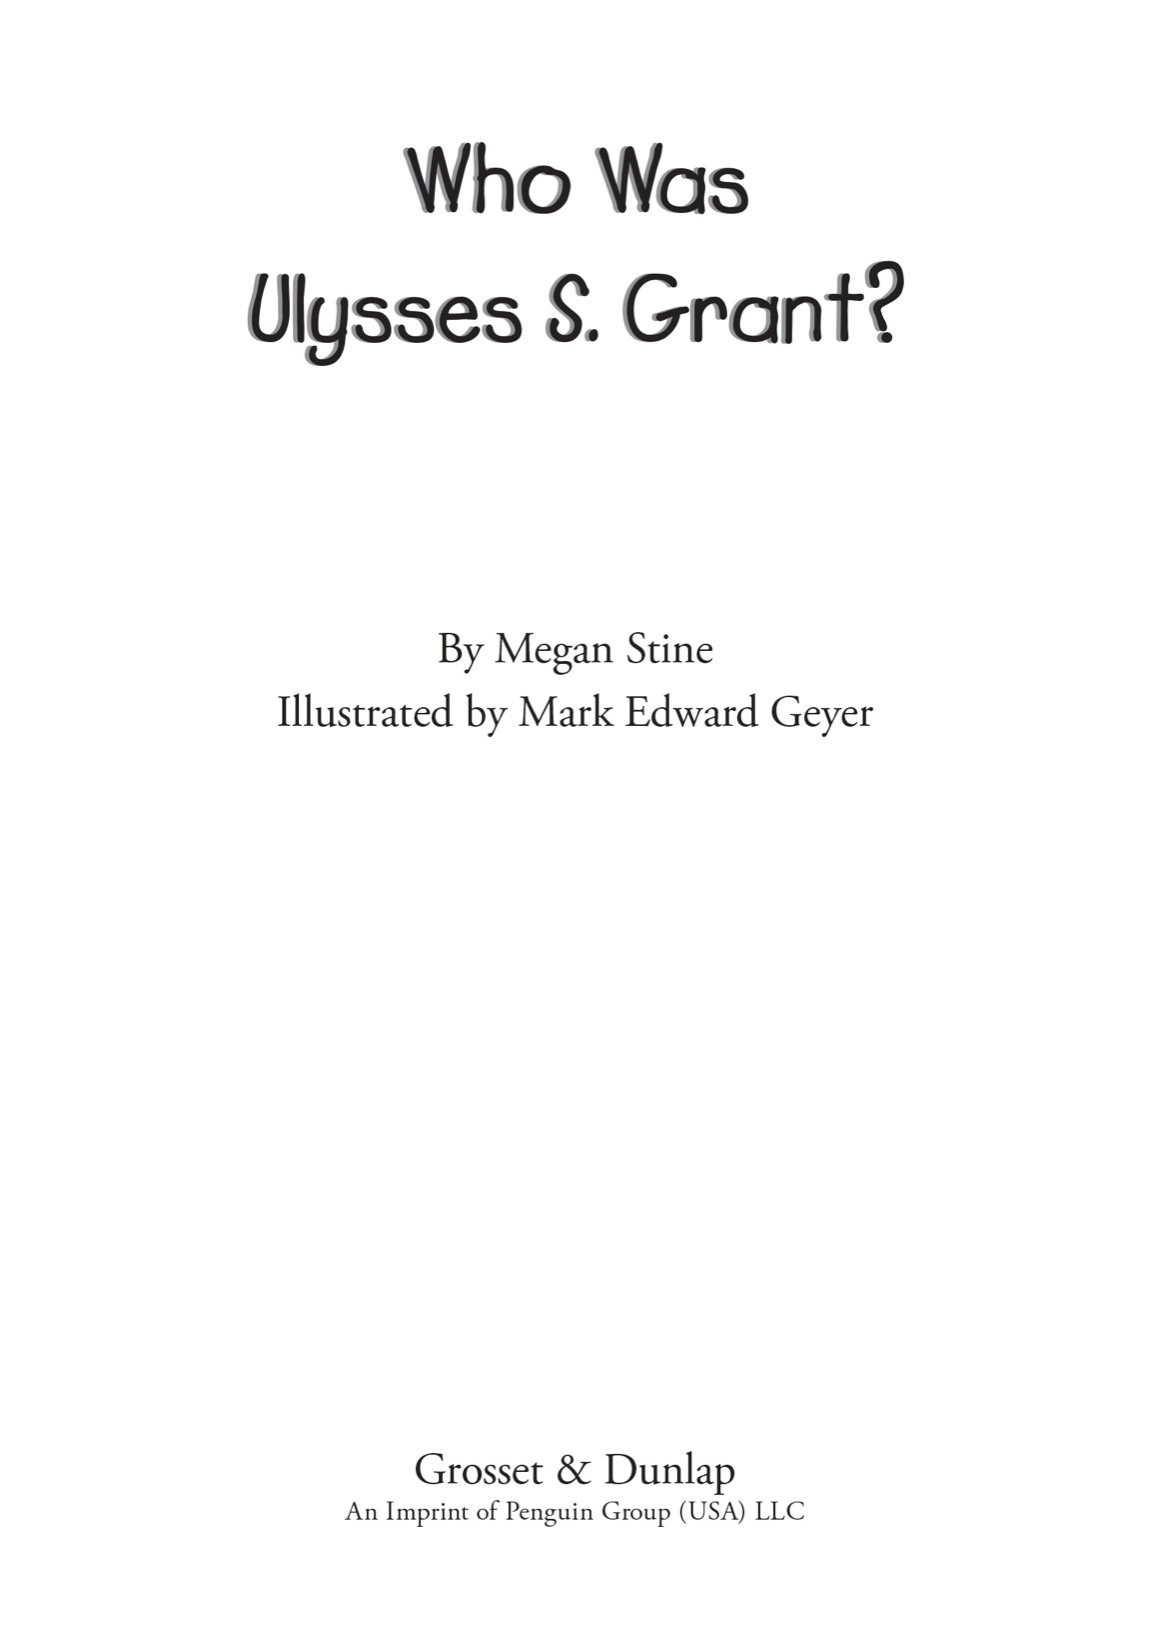 Who Was Ulysses S Grant - image 2